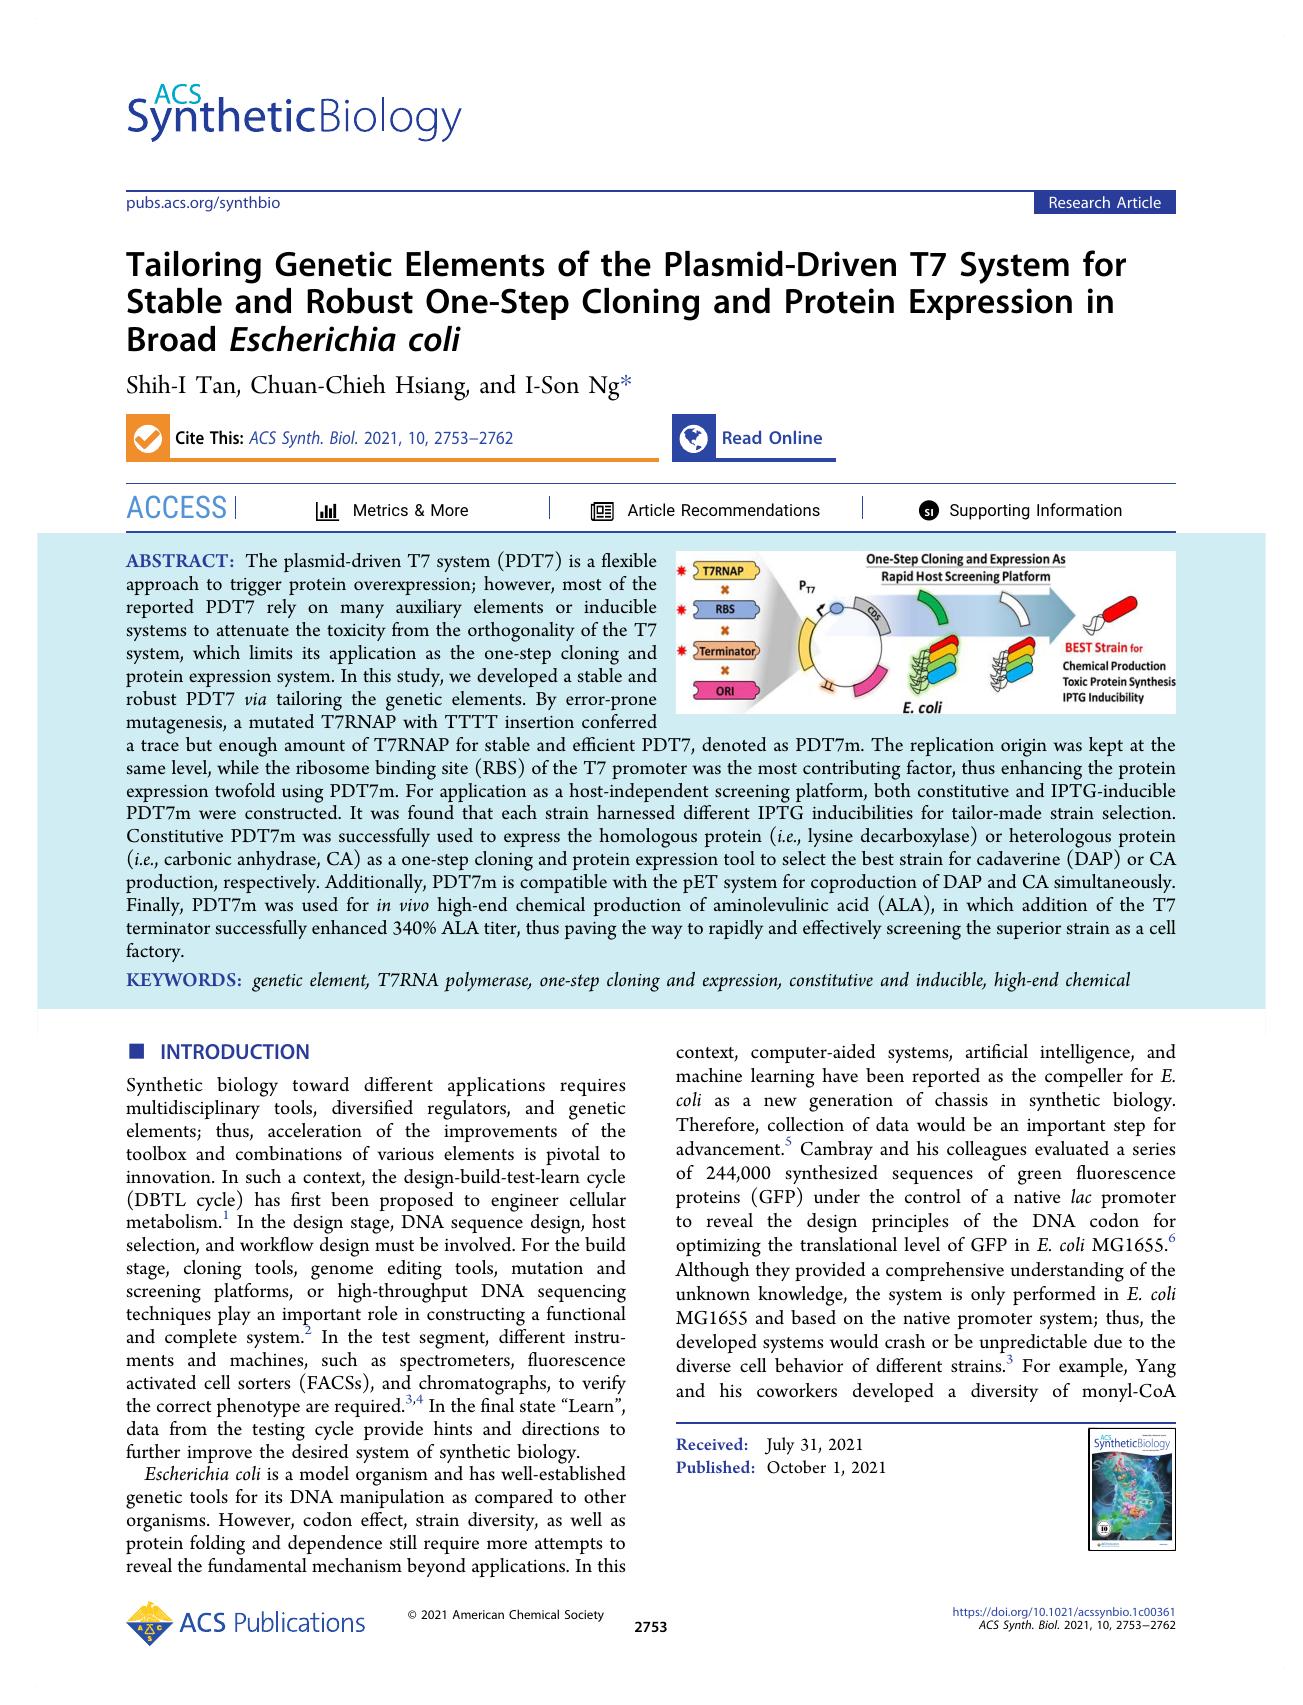 Tailoring Genetic Elements of the Plasmid-Driven T7 System for Stable and Robust One-Step Cloning and Protein Expression in Broad Escherichia coli by Shih-I Tan Chuan-Chieh Hsiang and I-Son Ng